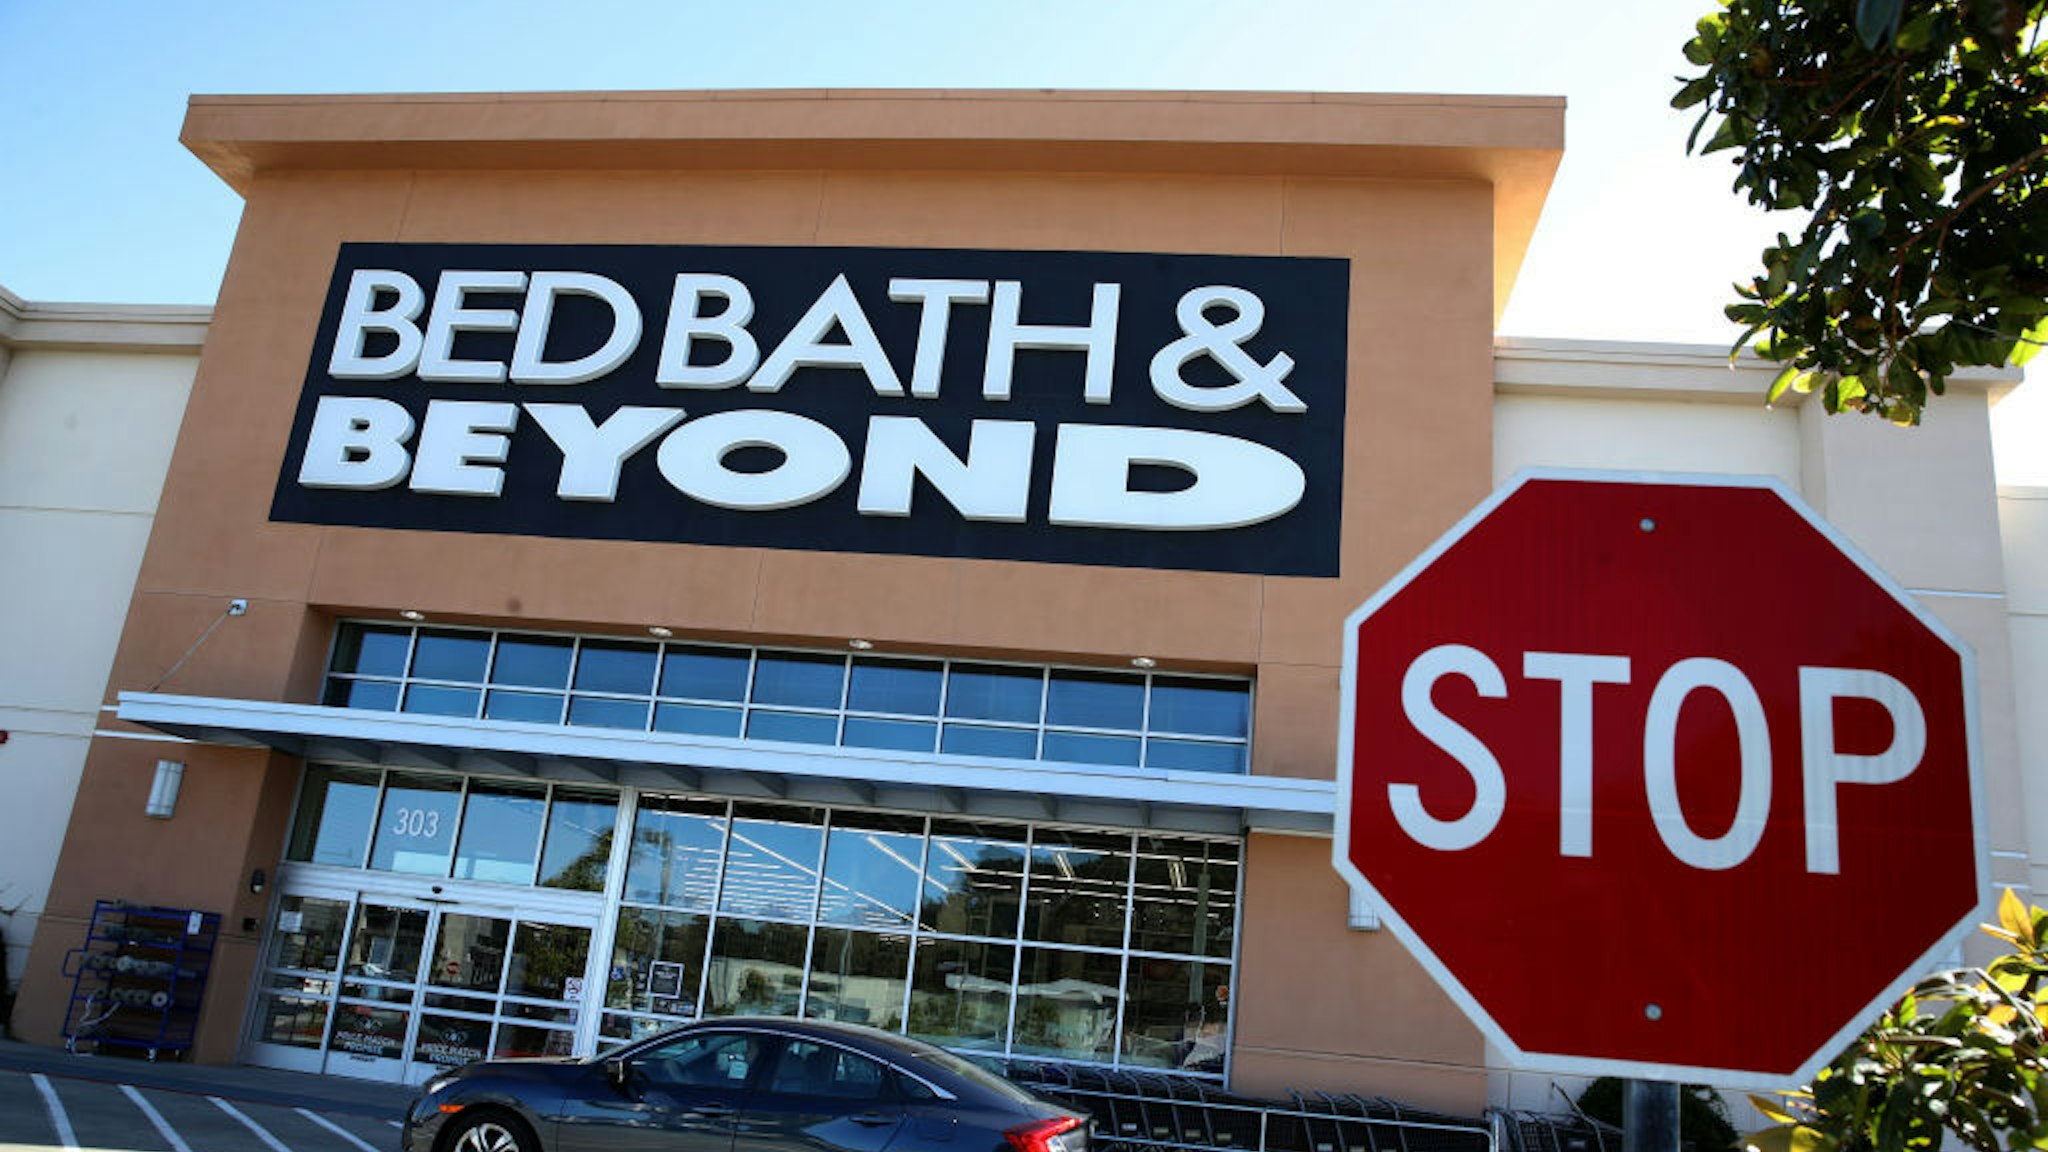 A view of a Bed Bath and Beyond store on October 03, 2019 in Daly City, California. New Jersey based home goods retailer Bed Bath and Beyond announced that it plans to close 60 of its stores in the fiscal year, 20 more than previously announced in April of this year. (Photo by Justin Sullivan/Getty Images)